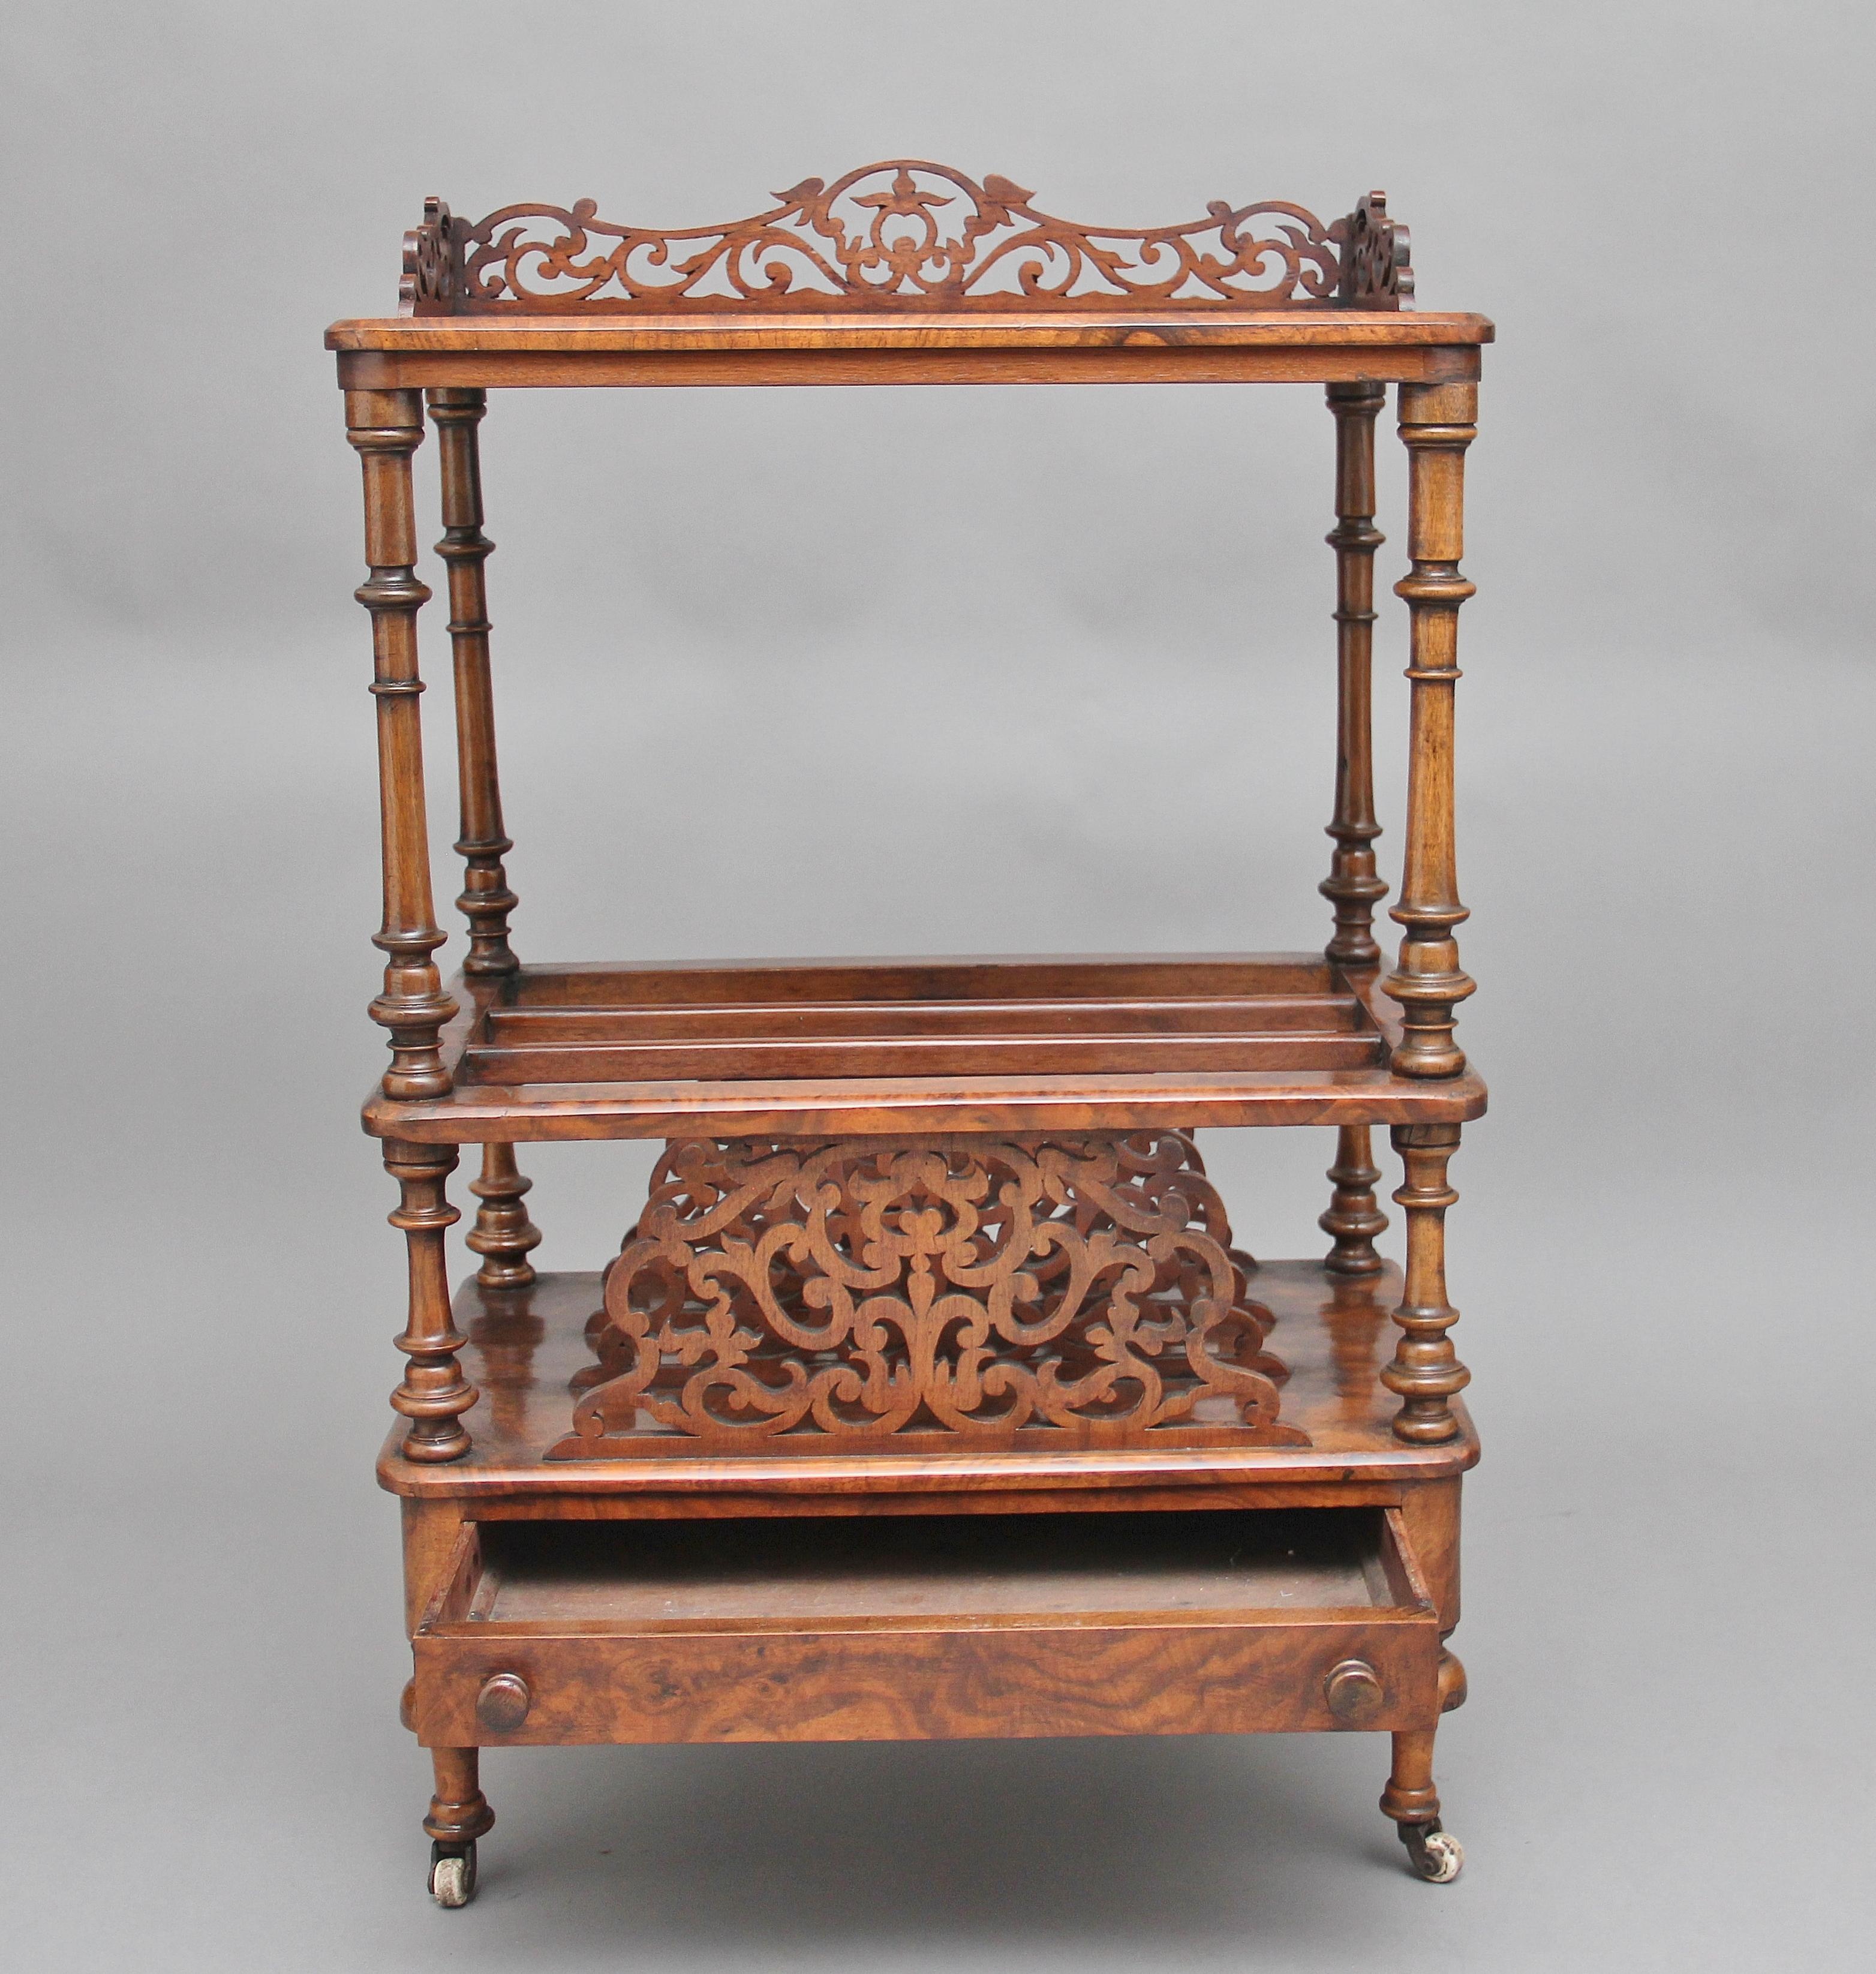 Early Victorian 19th Century burr walnut Canterbury with a carved and pierced gallery